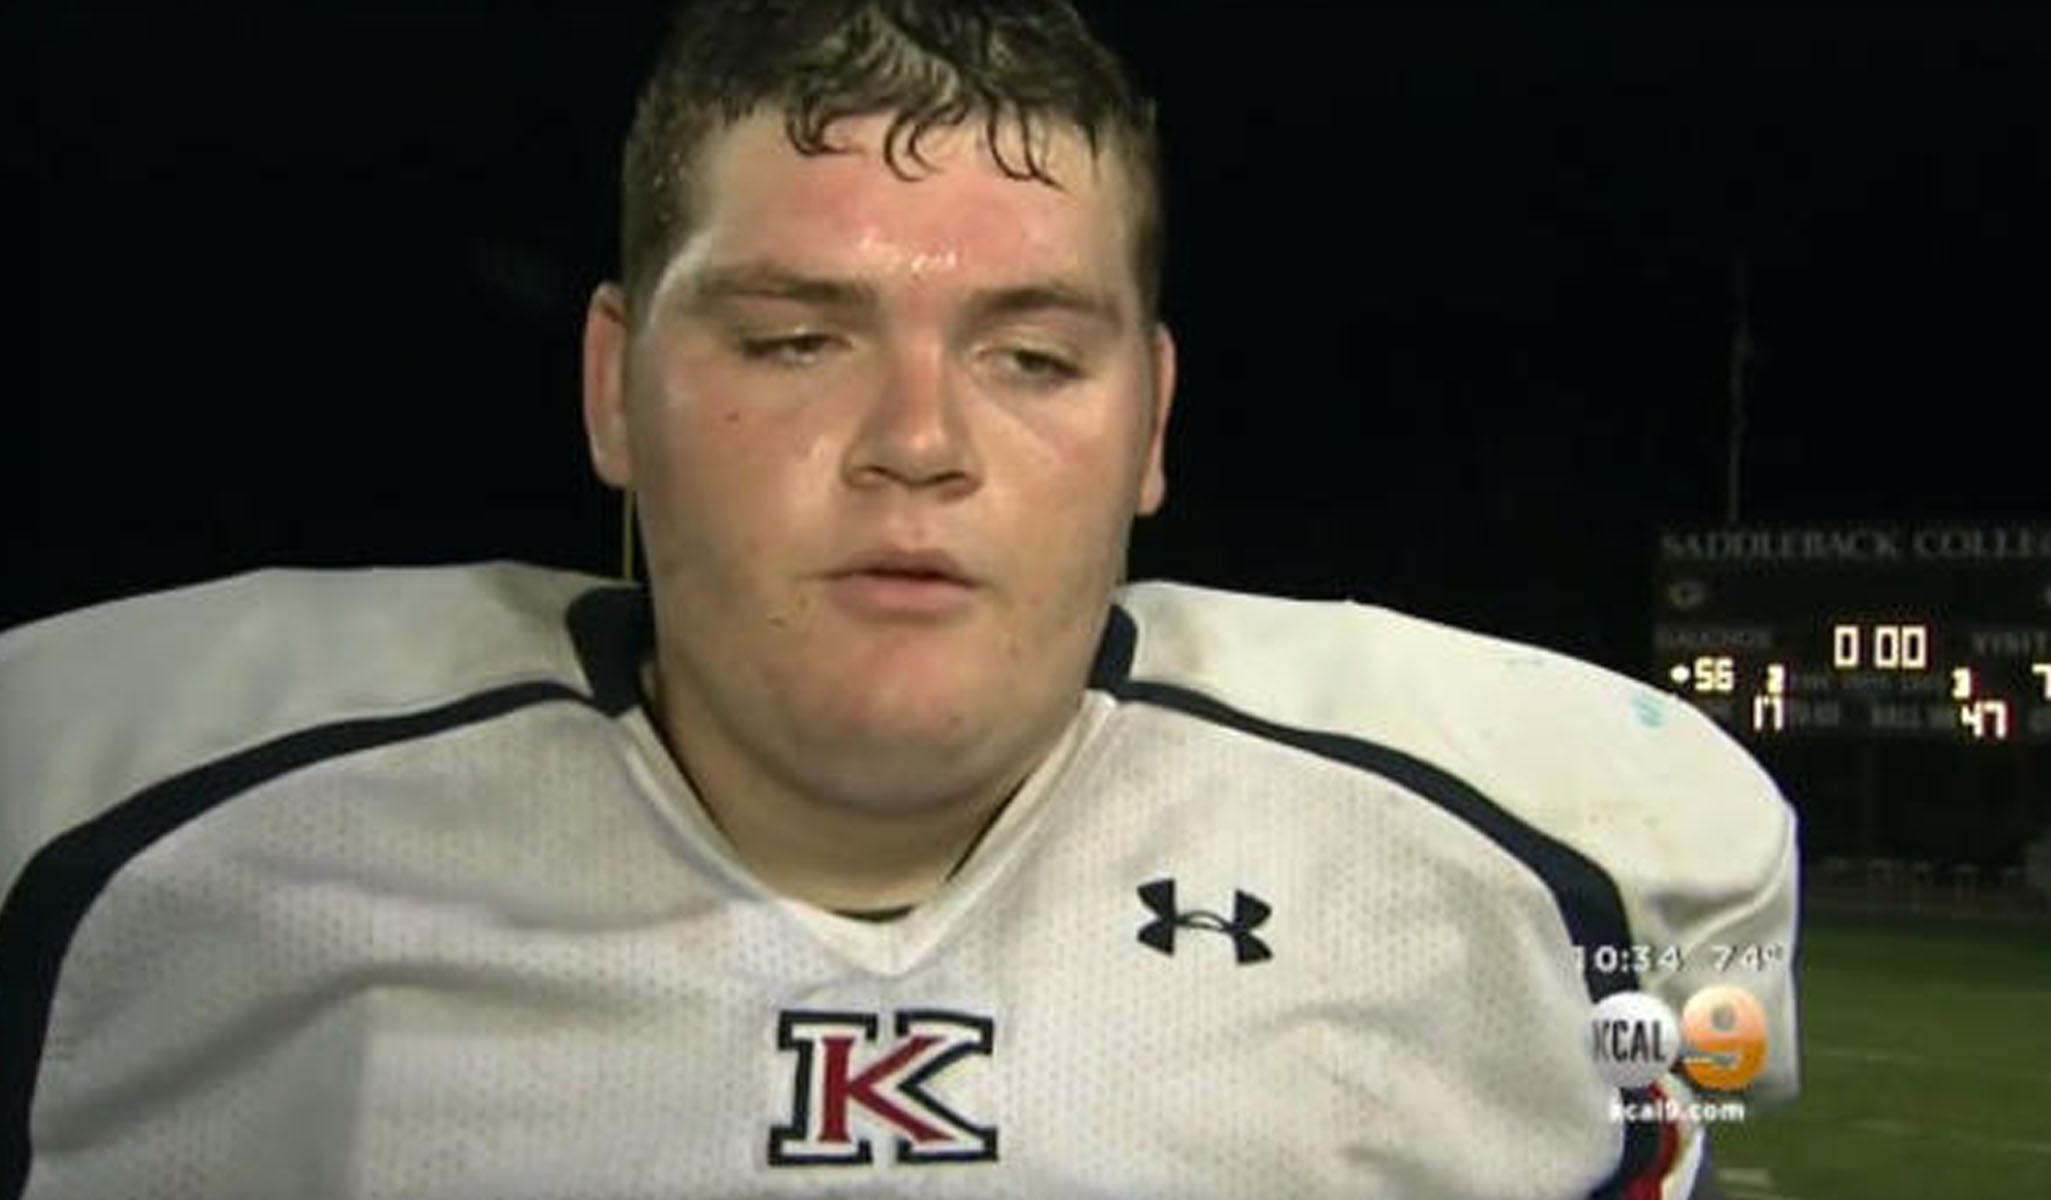 7-foot, 400-pound high school senior possibly largest football player